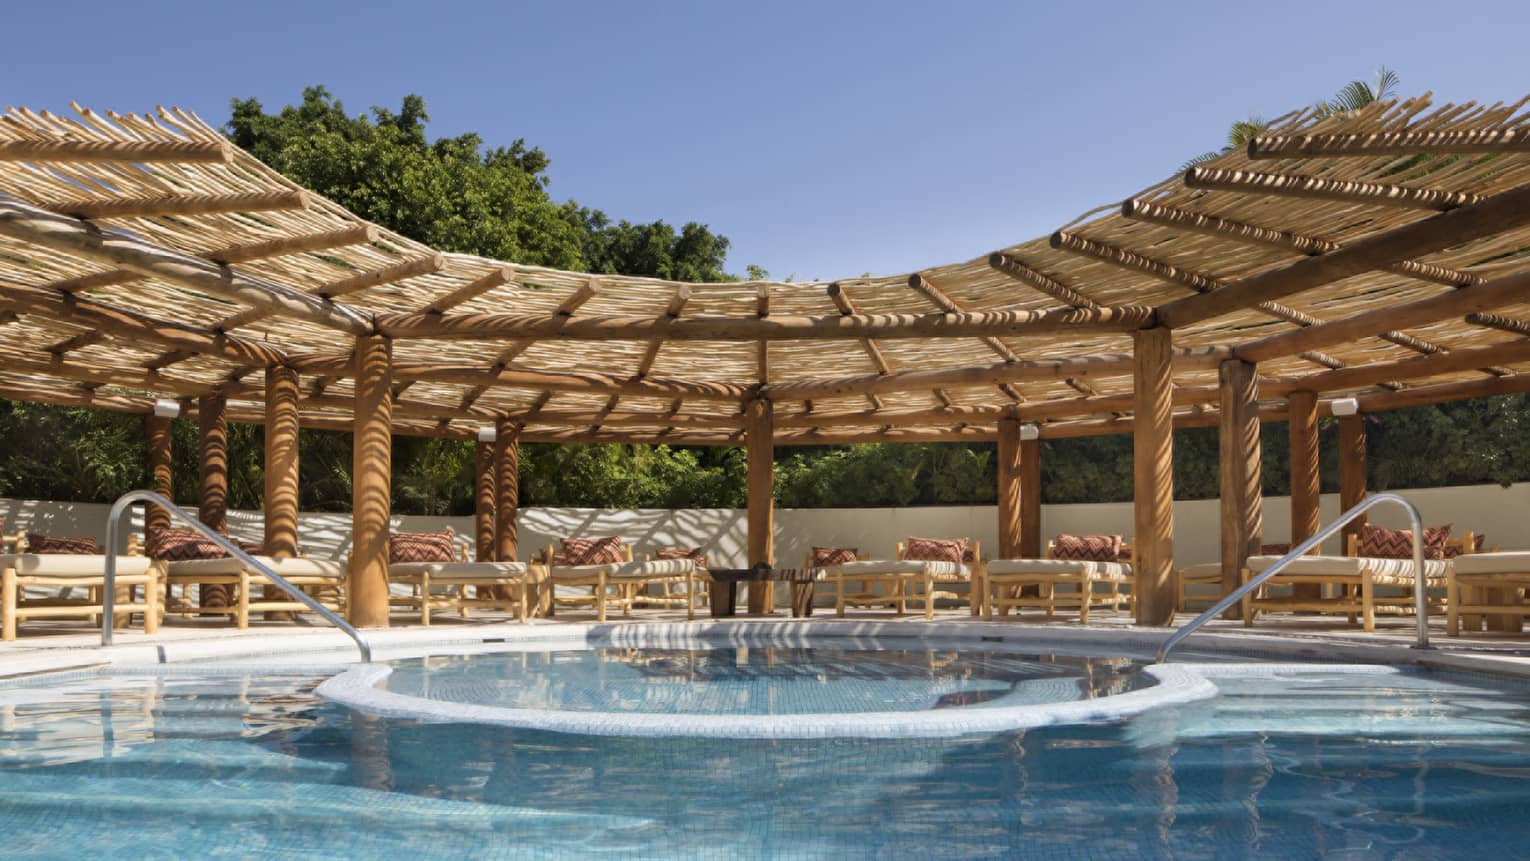 Resort pool with two entries and lounge chairs under thatched-roof awning